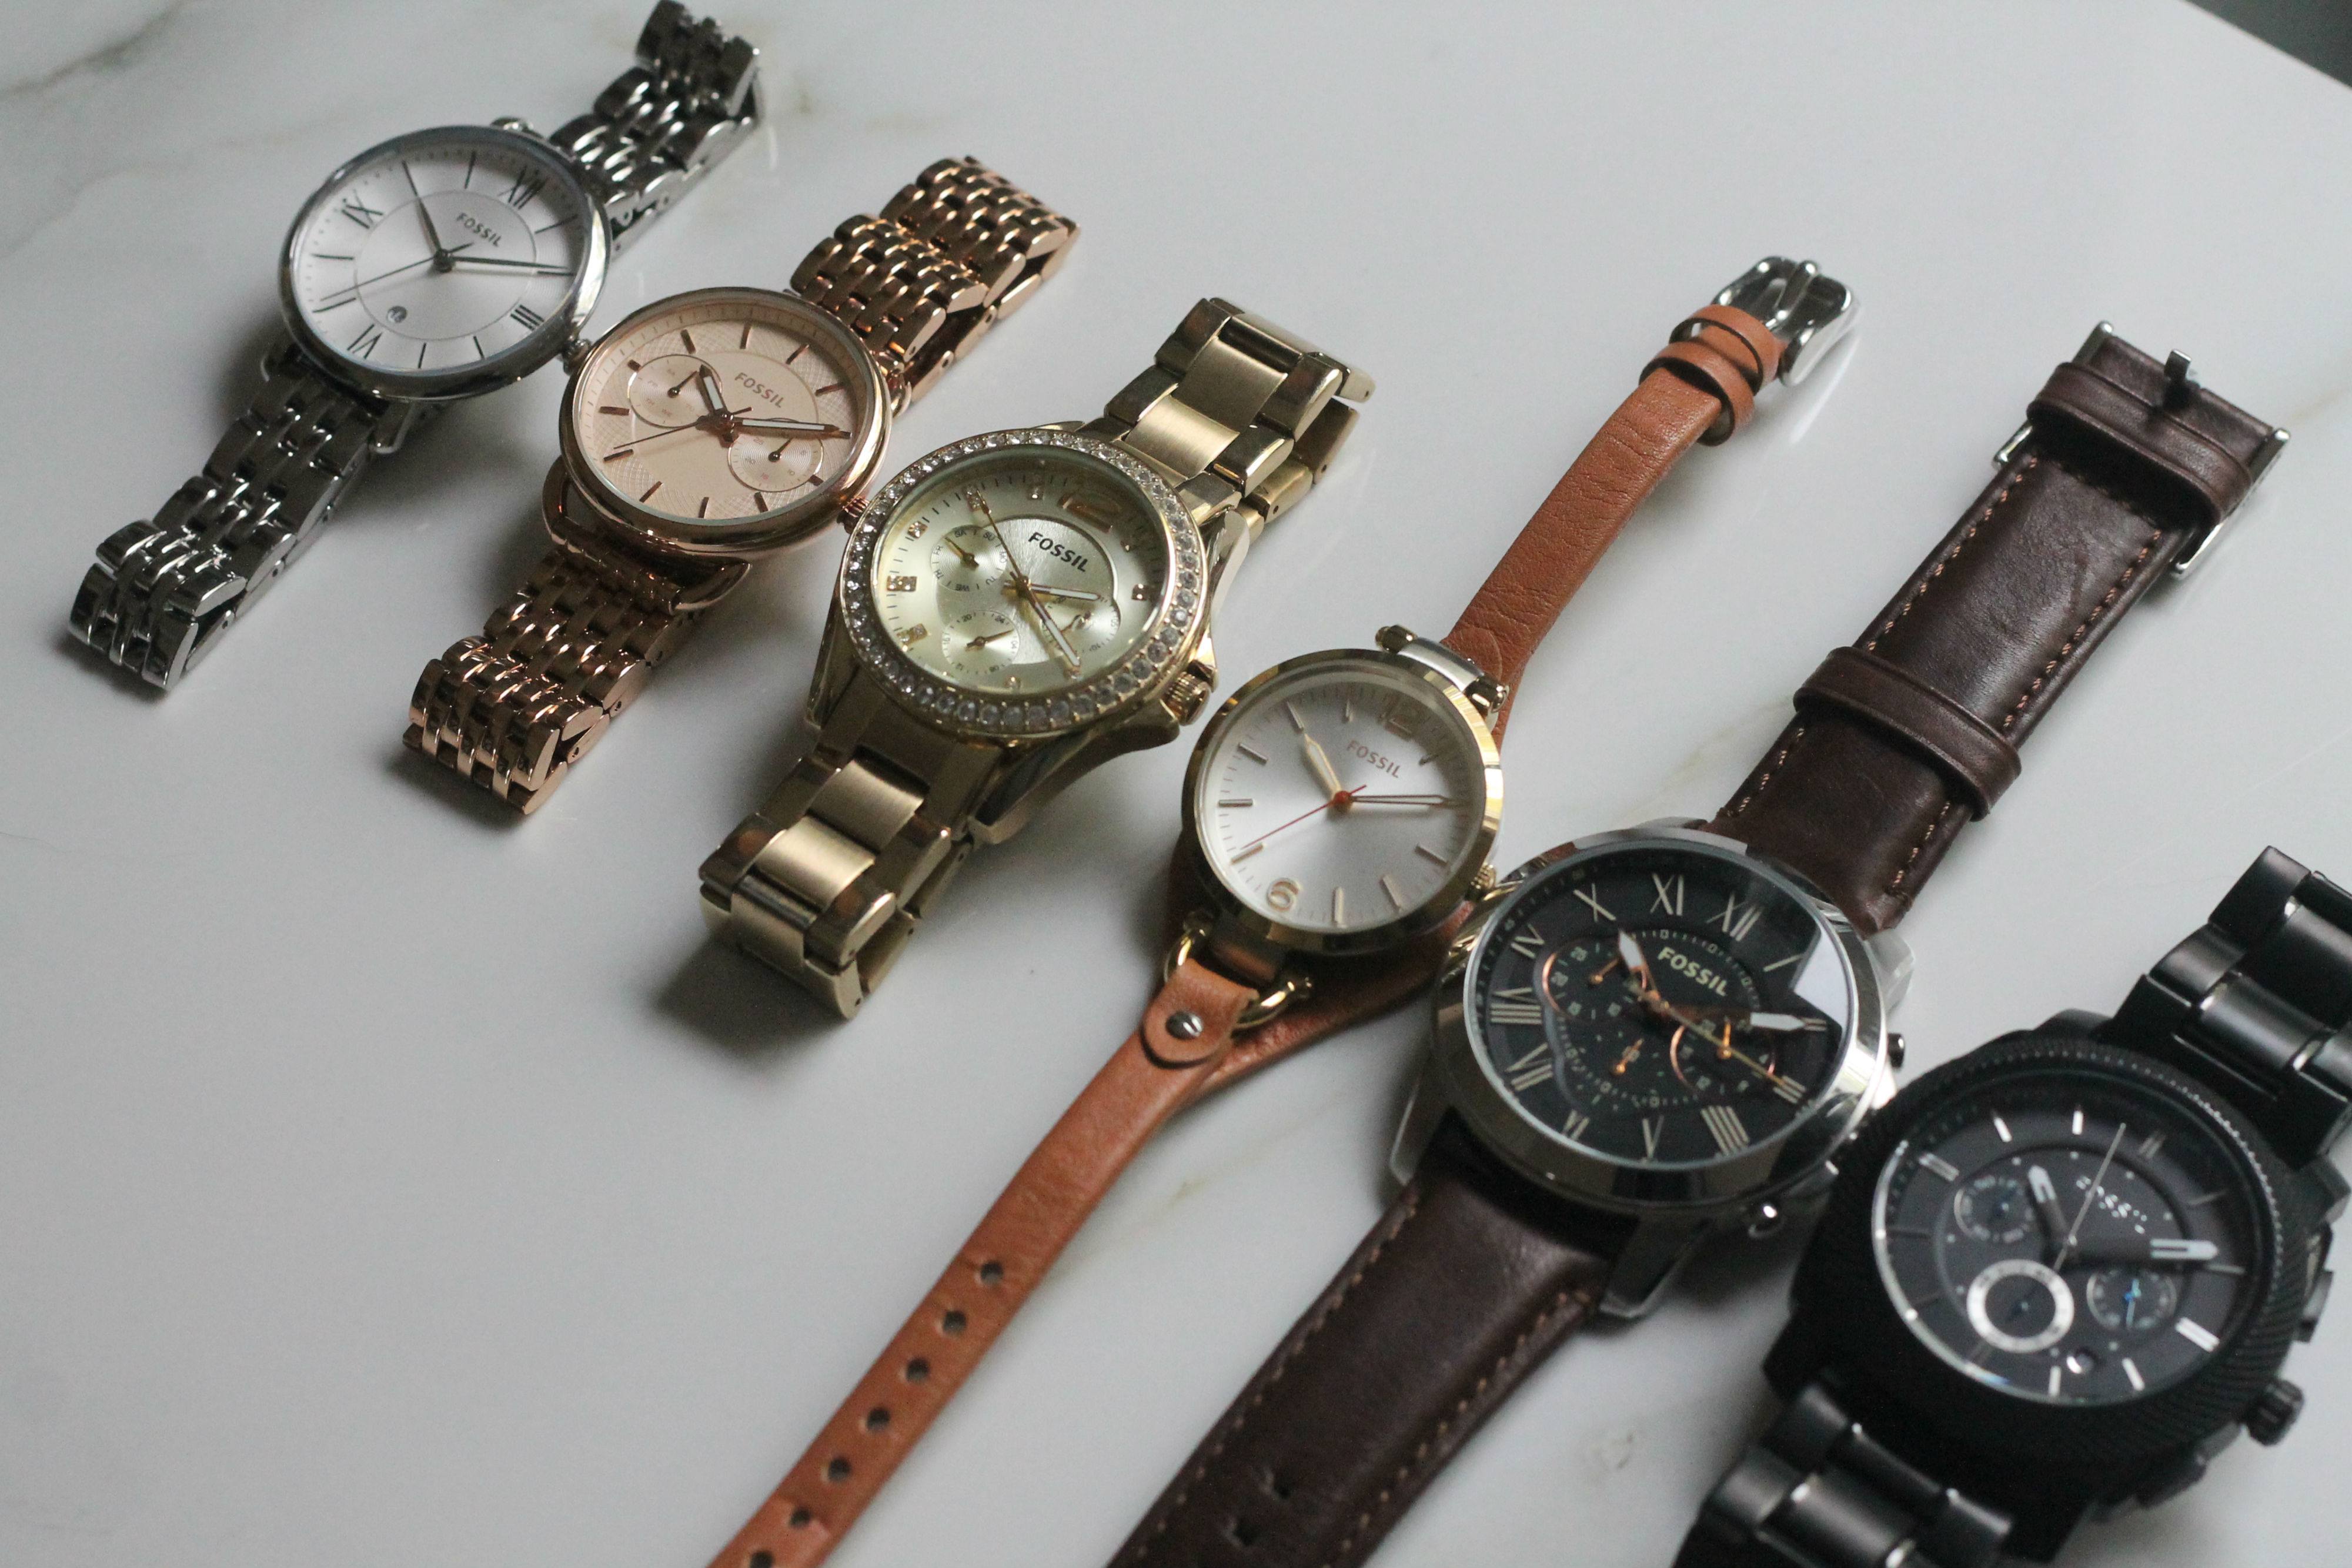 New-Fossil-Watches-For-Men-Women-Best-Buy-1